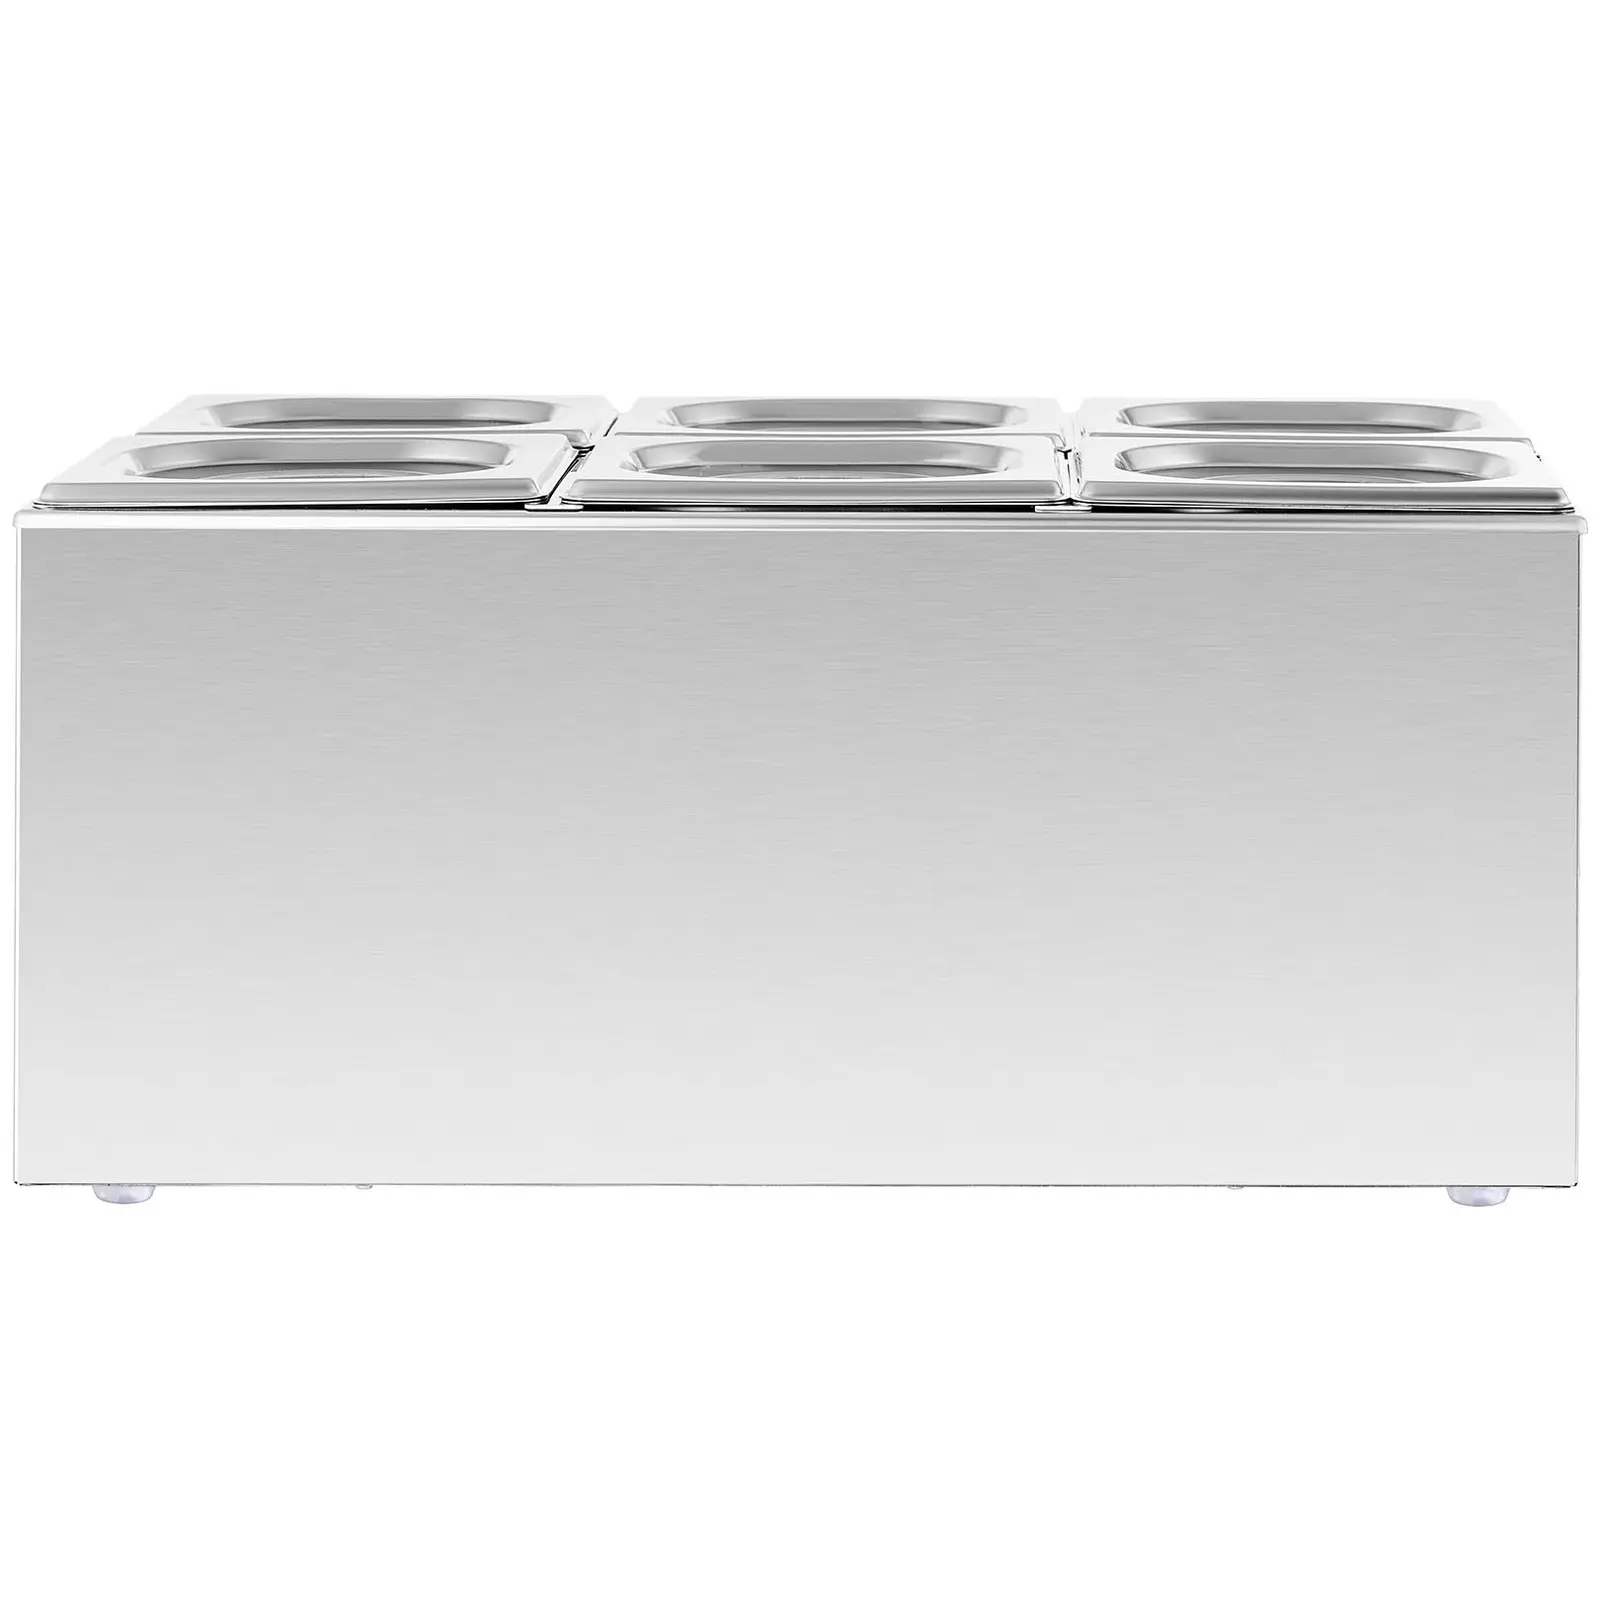 Bain-marie professionnel - 640 W - 6 x Bacs GN 1/6 - Royal Catering